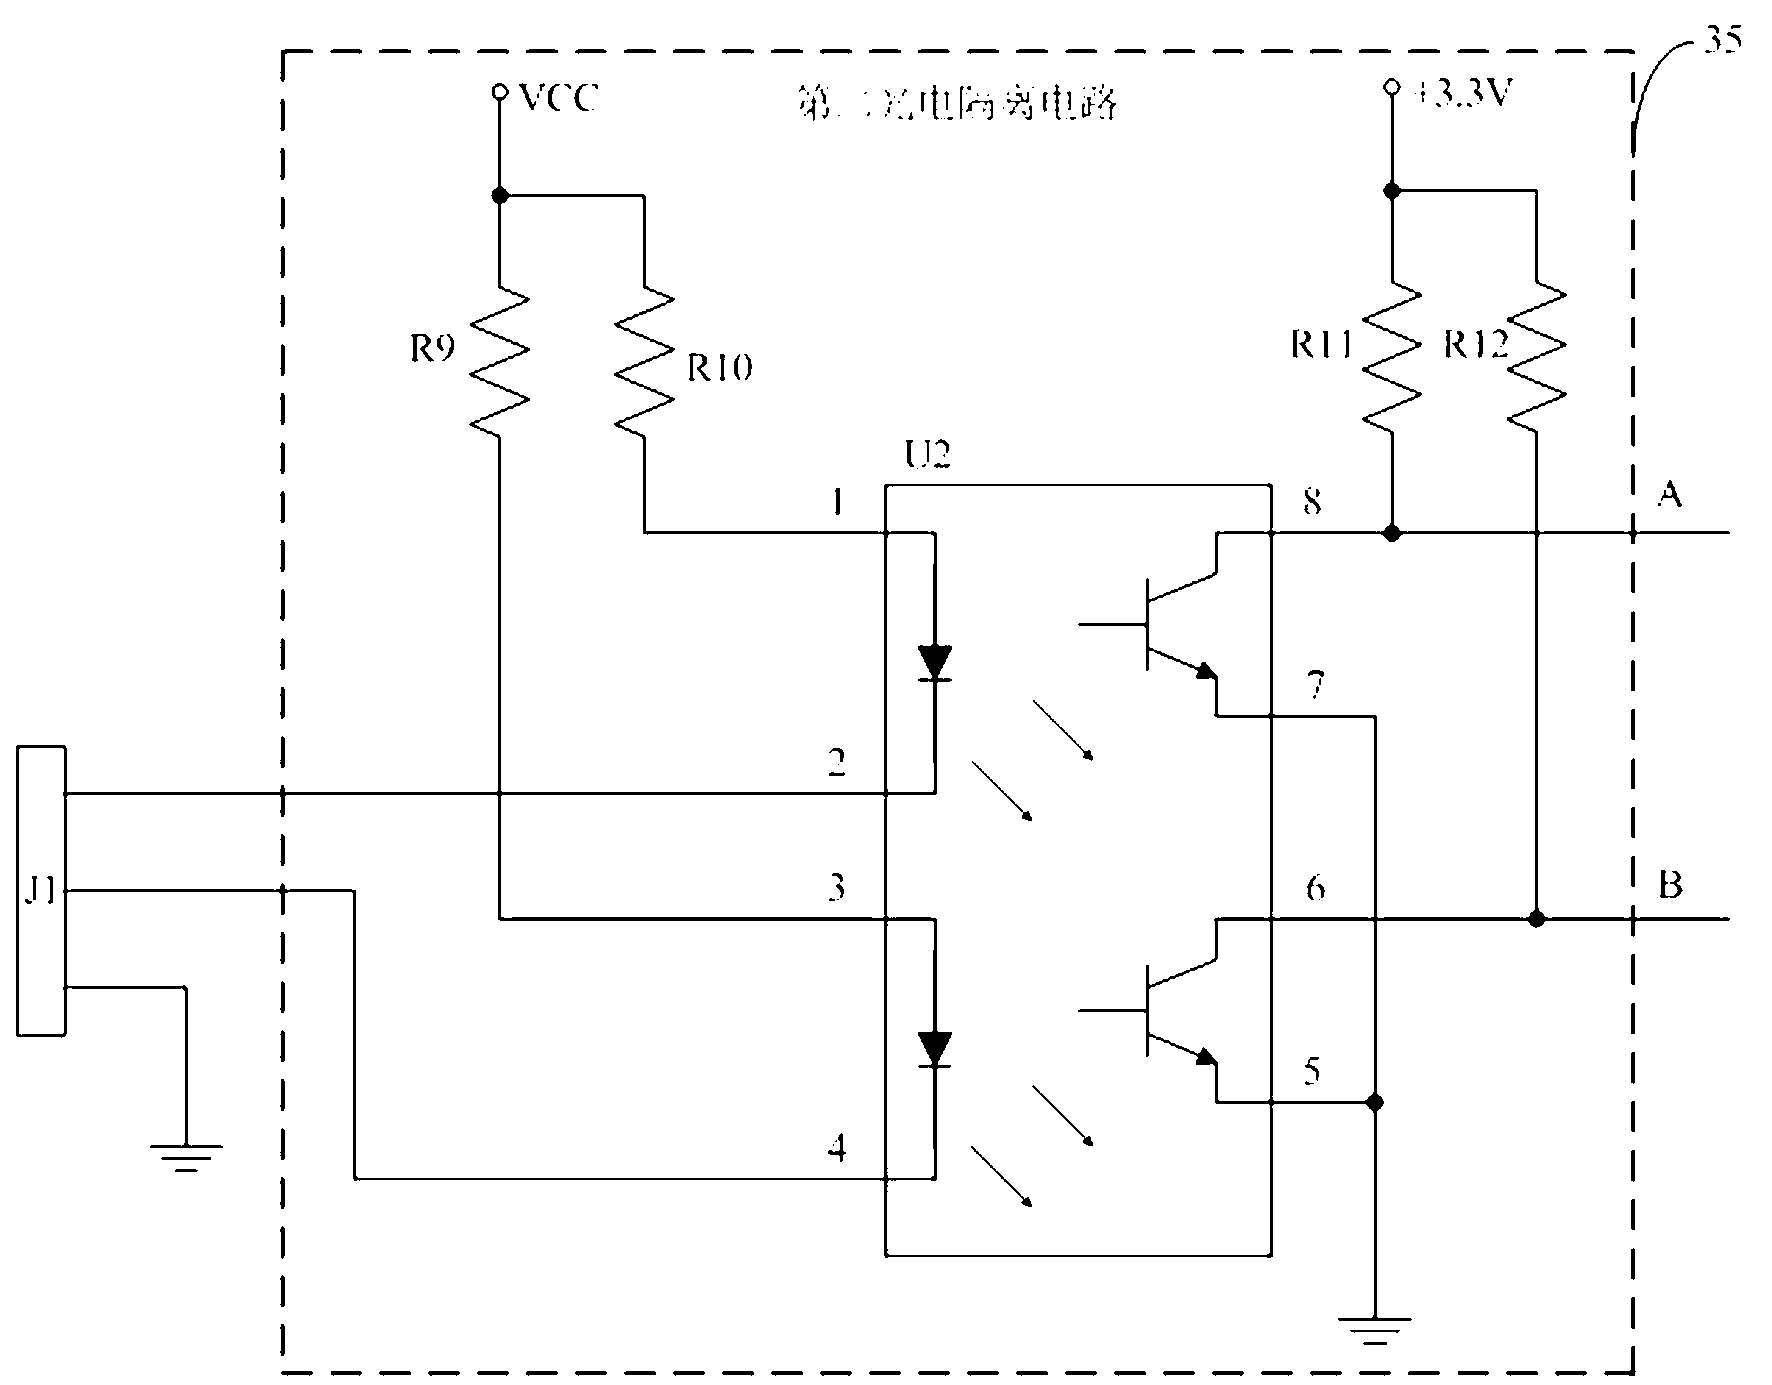 Automatic switching circuit for RS232 interface and RS485 interface and serial port liquid crystal display module